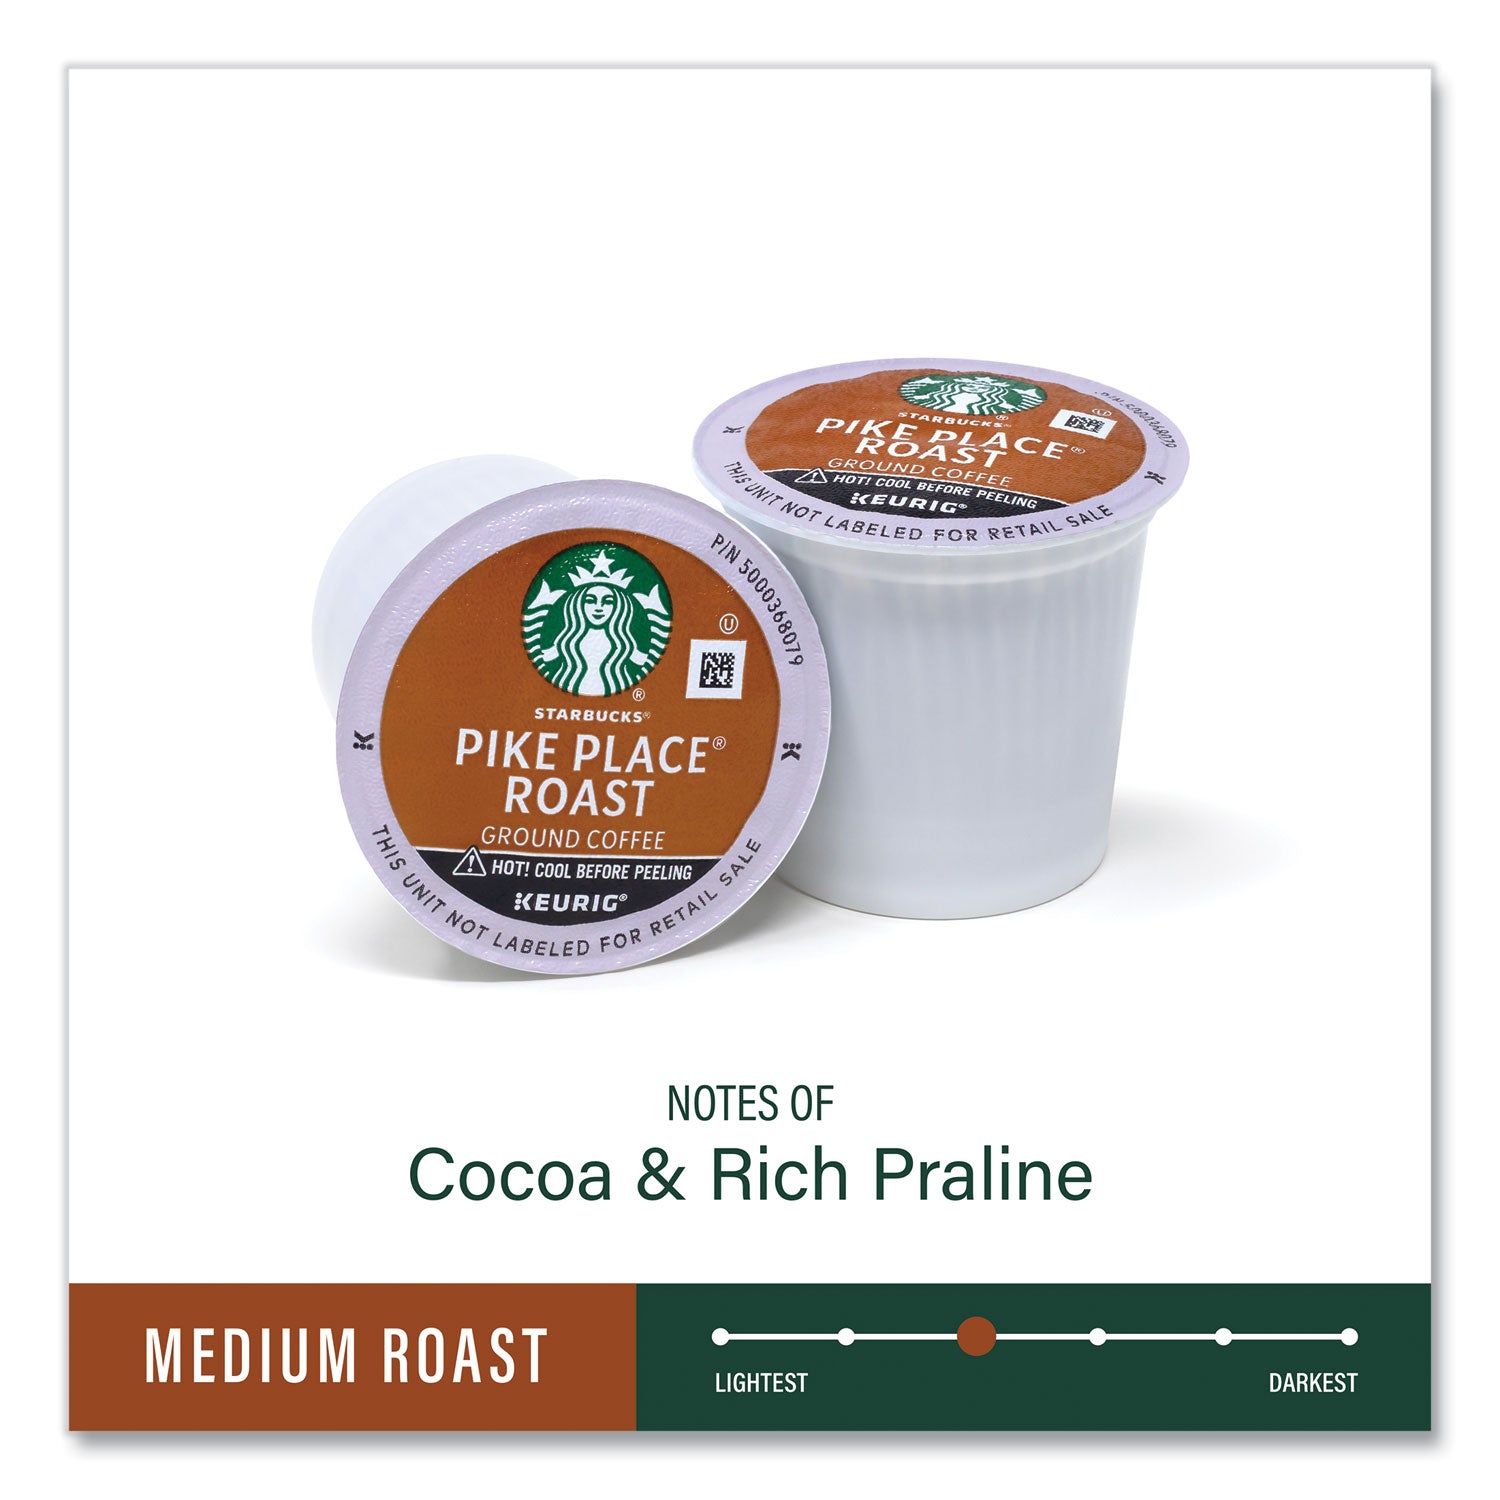 pike-place-coffee-k-cups-72-carton-ships-in-1-3-business-days_grr22002158 - 5